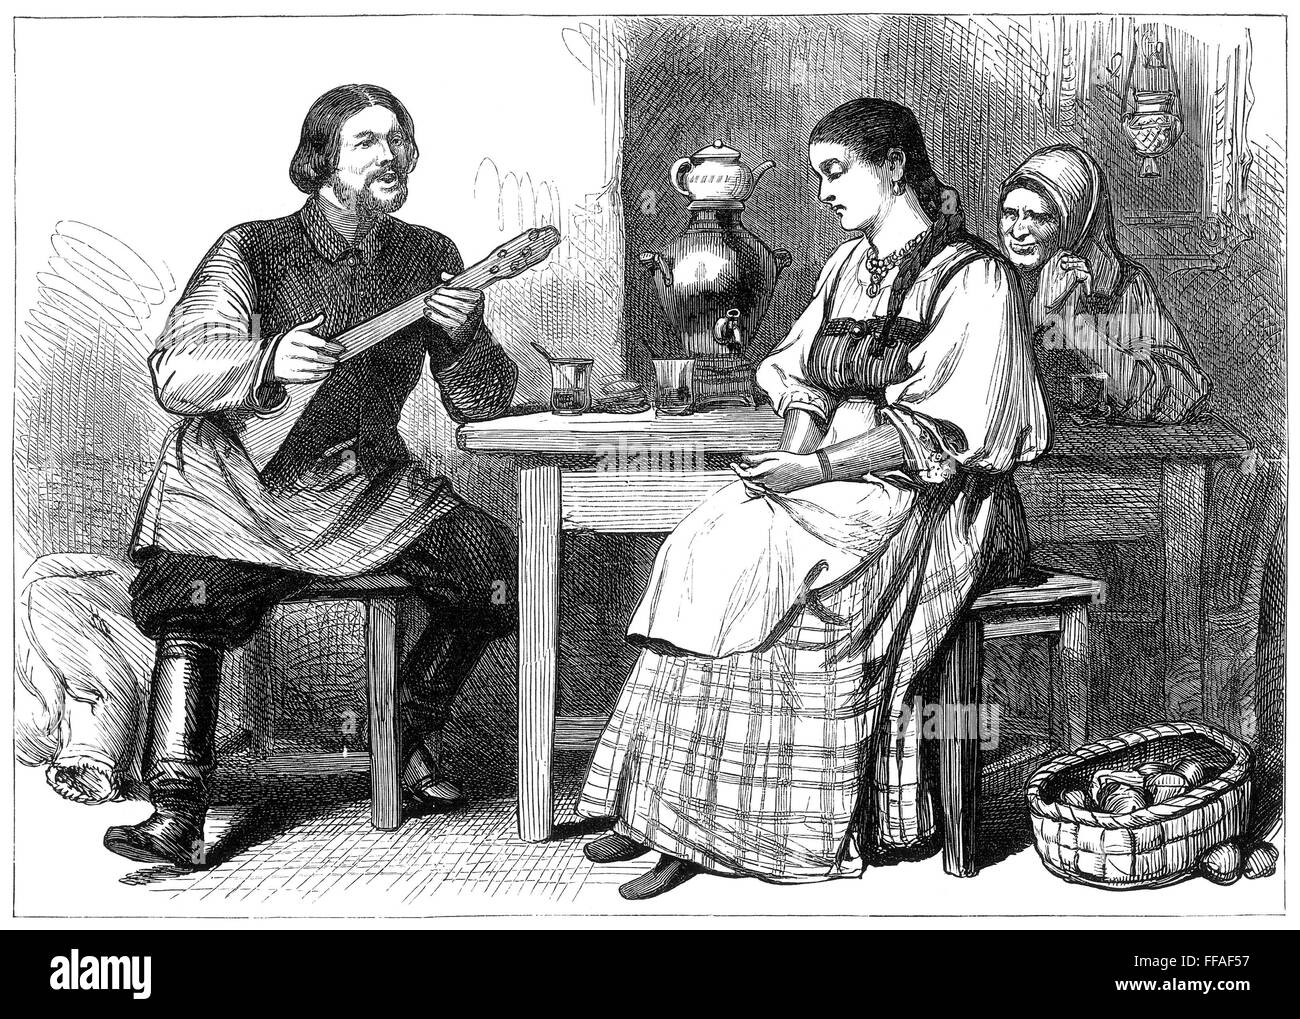 COURTSHIP IN RUSSIA, 1880. /nWood engraving, English, 1880. Stock Photo